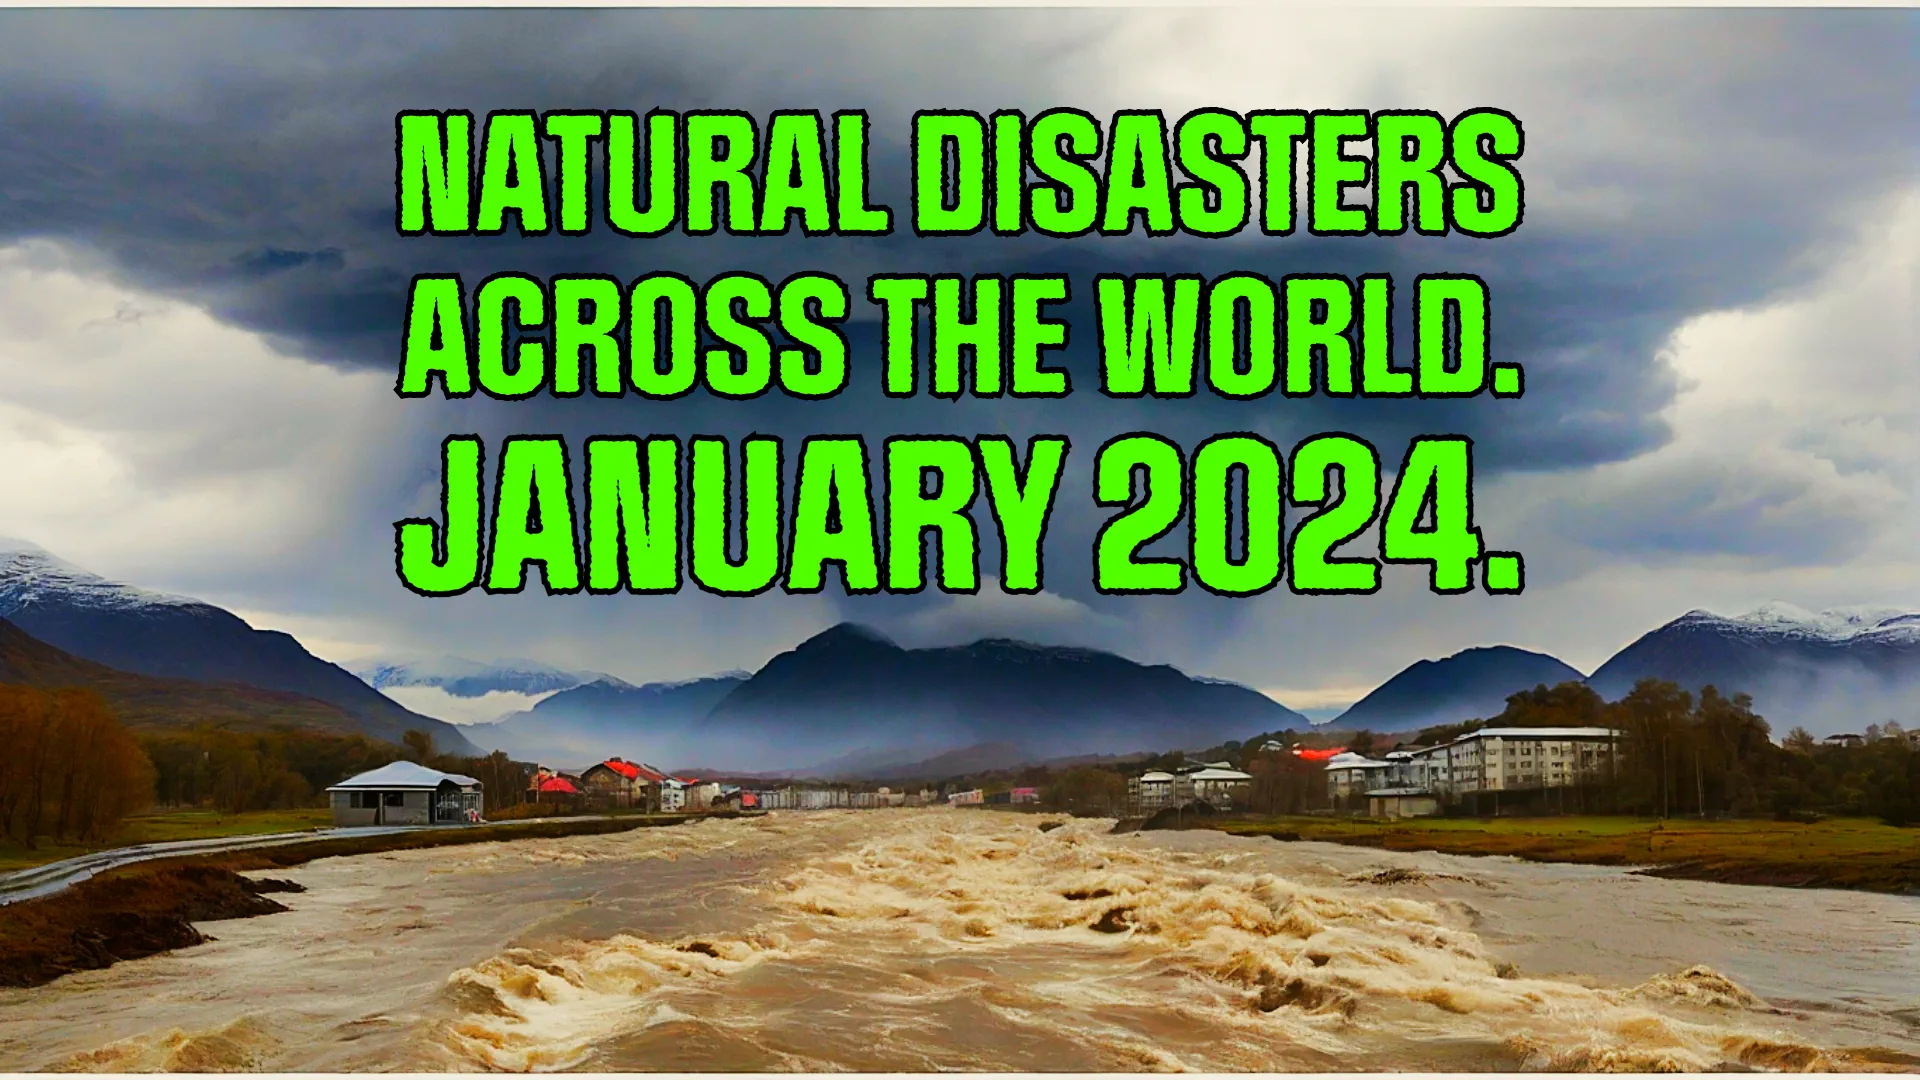 Natural disasters across the world. Latest events